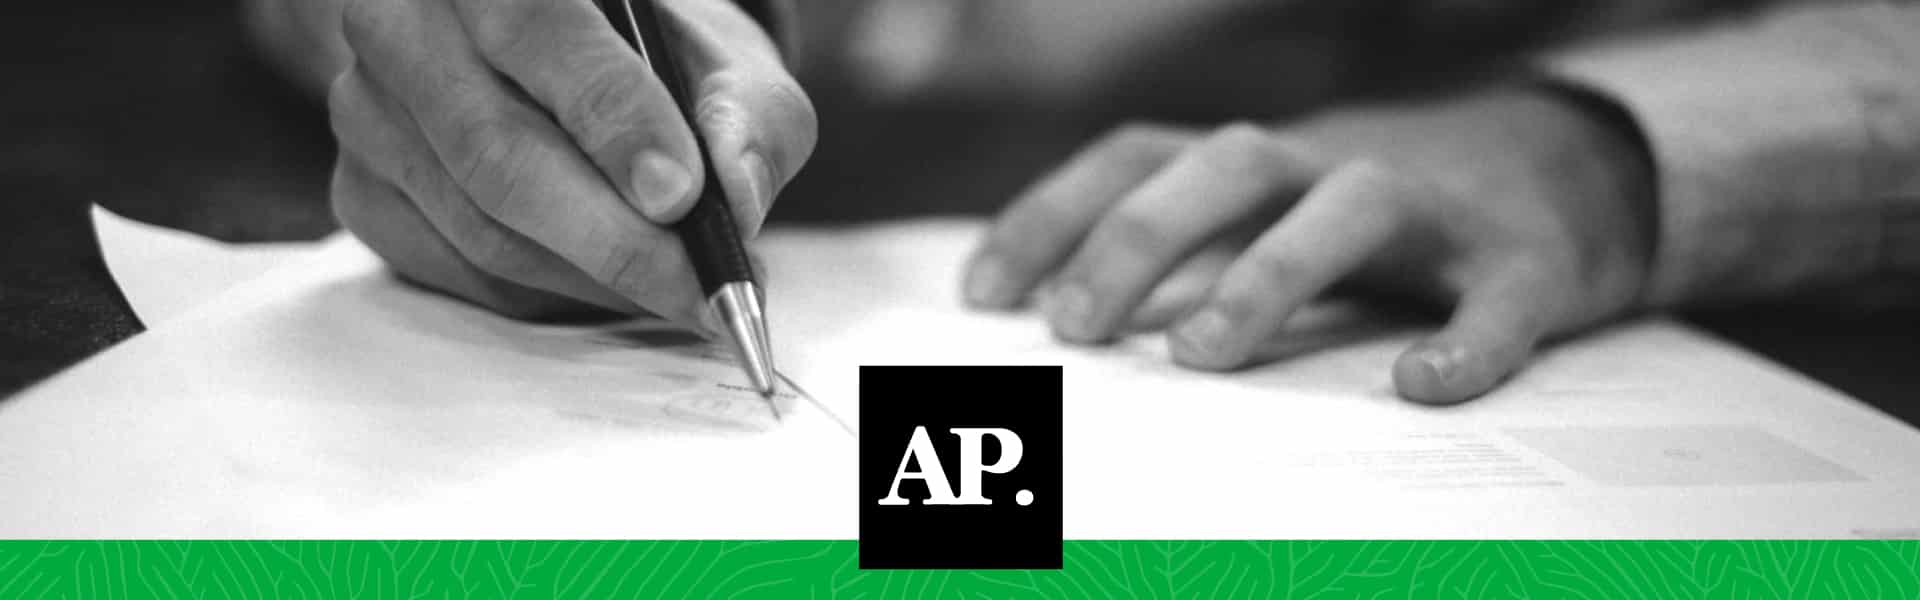 AP logo with person signing a piece of paper.